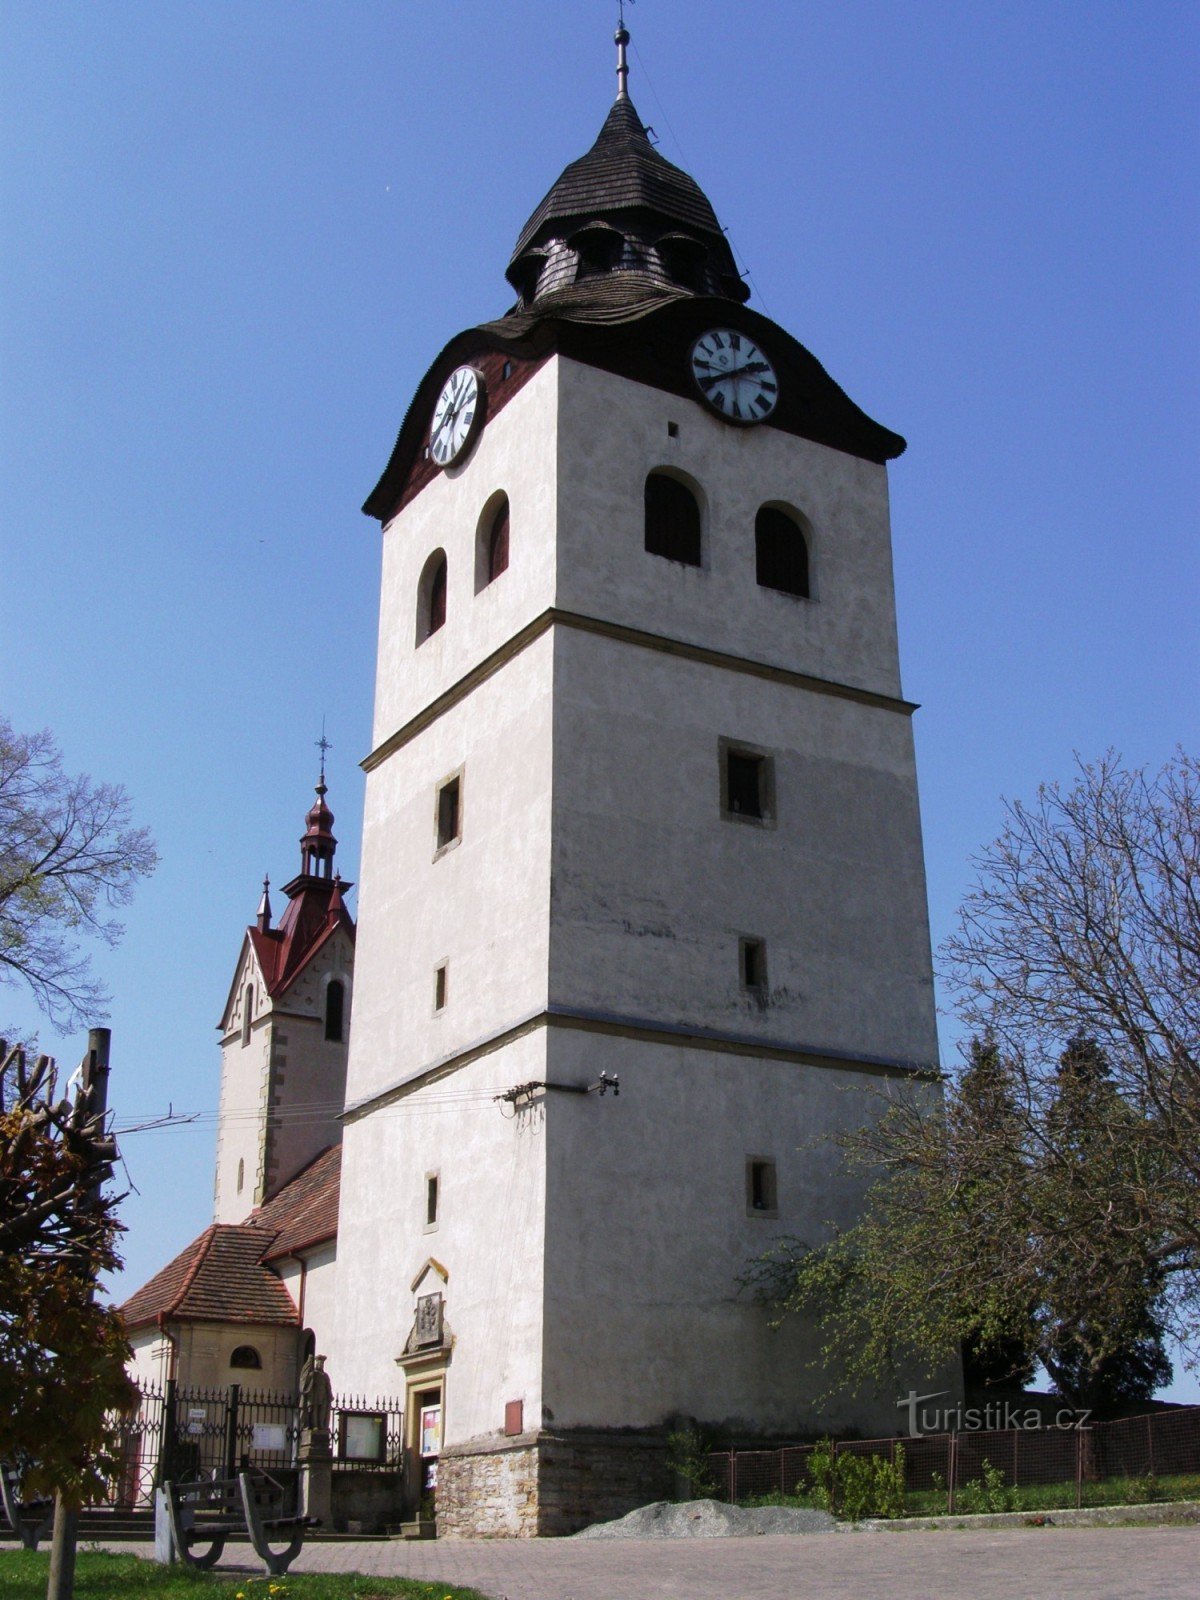 Bohuslavice - church of St. Nicholas with the bell